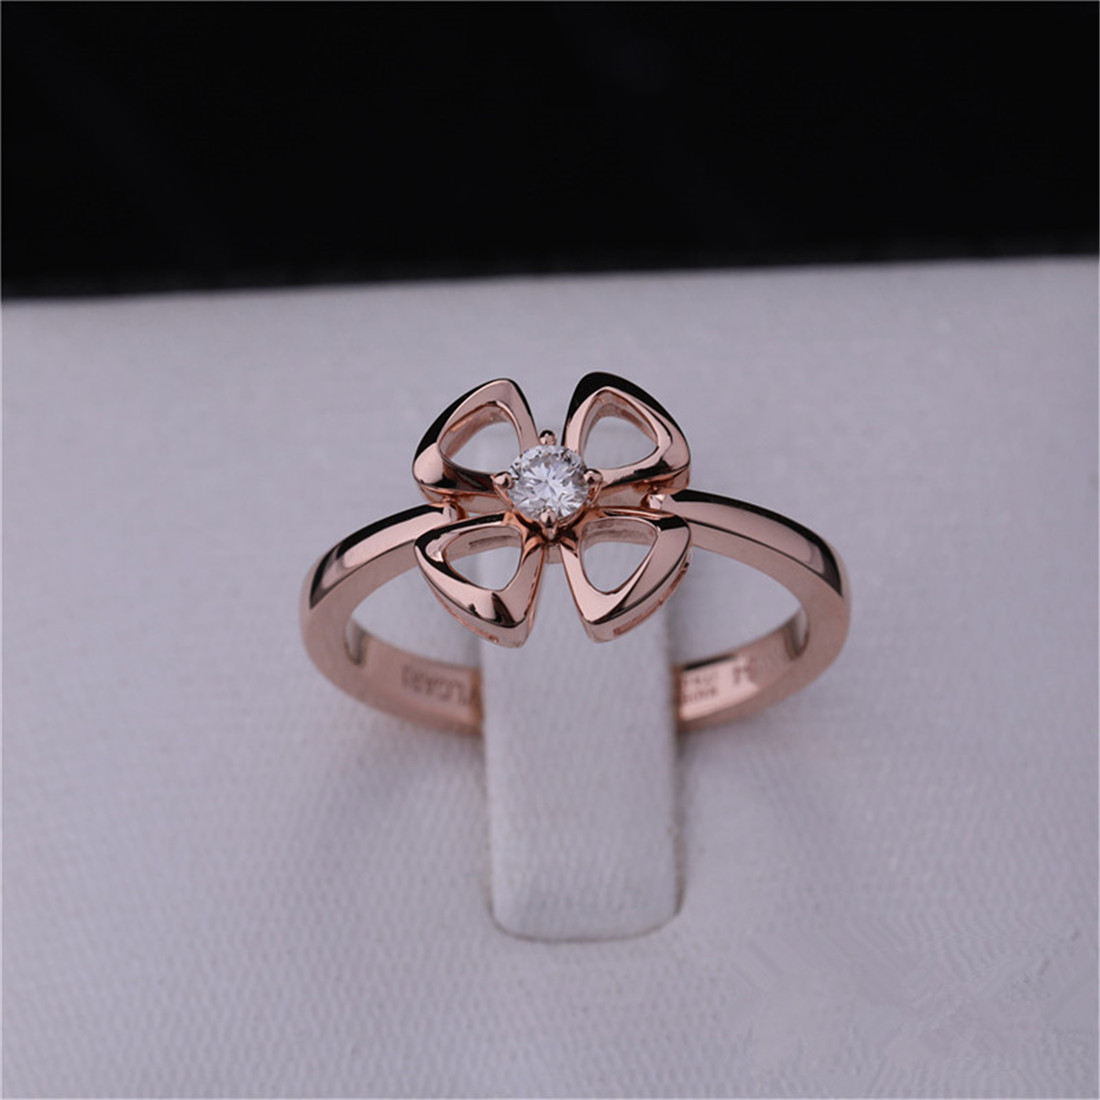 Quality Roma Gold Brand Jewelry Fiorever 18 Karat Rose Gold Ring set with a central diamond REF 355305 for sale